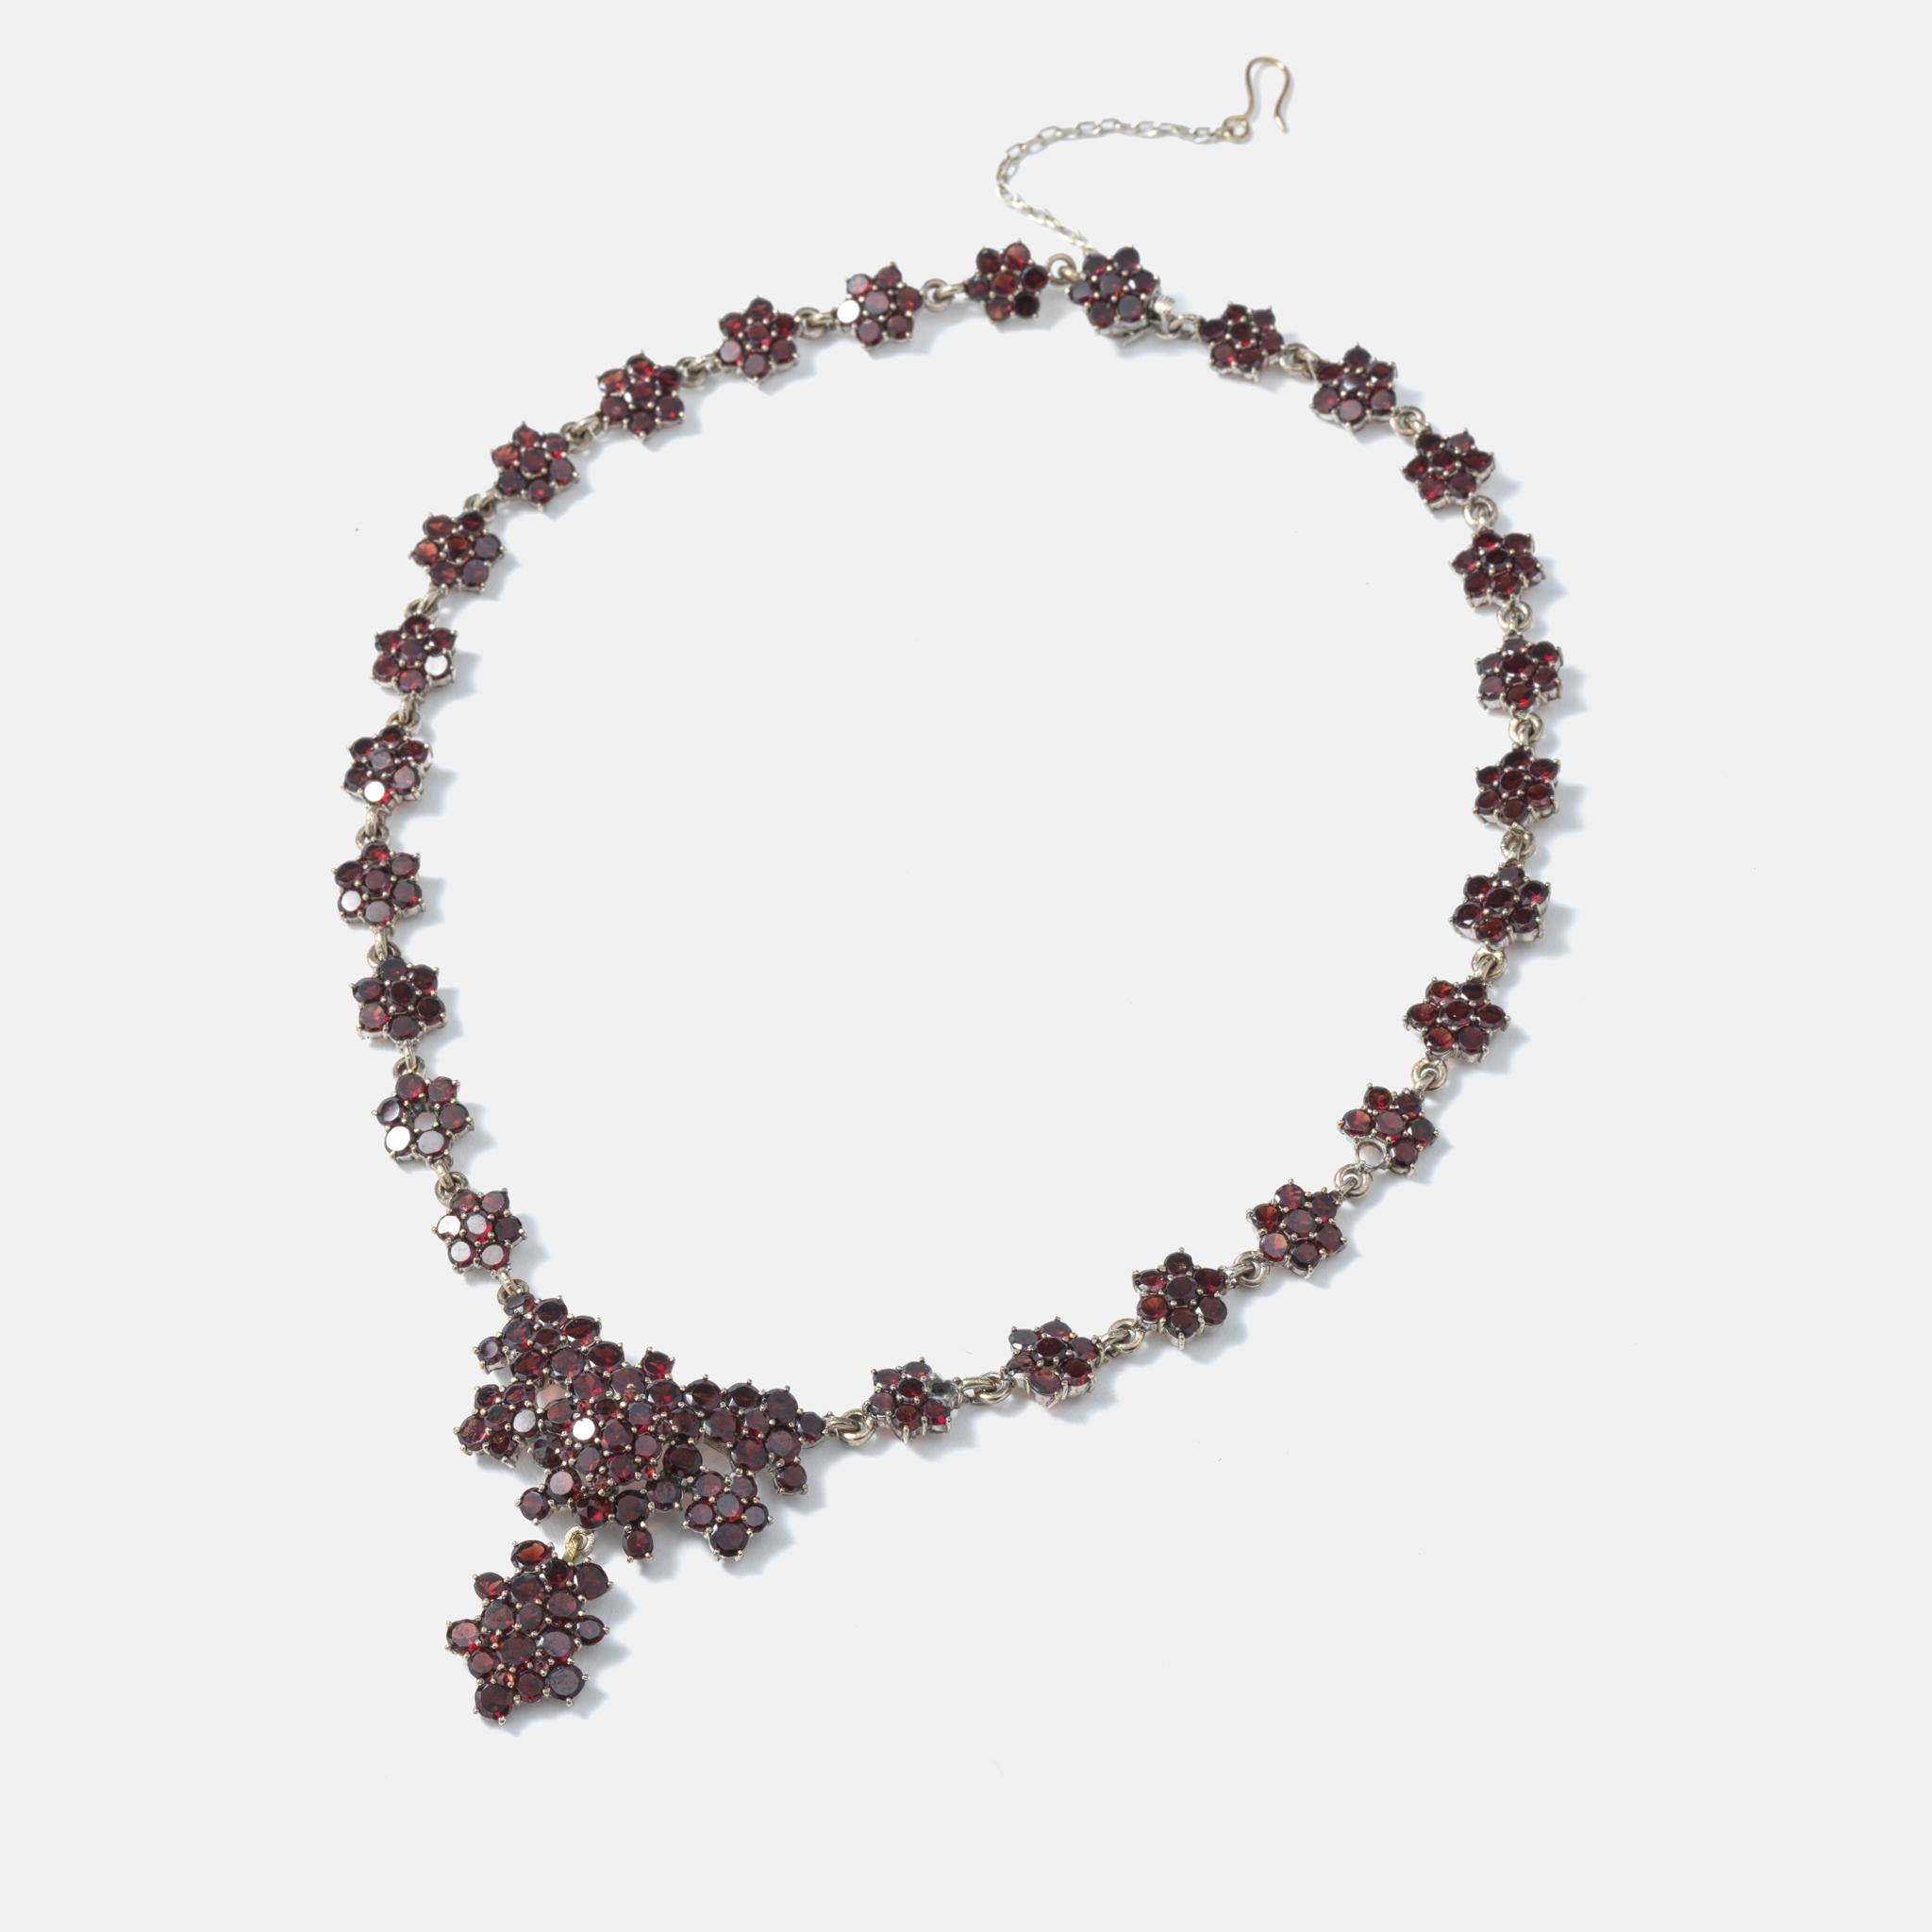 Garnets were popular in the 19th c and maybe they will be sometime in the future.. But today not. That is why a piece like this can be bought at such a low price.

The craftsmanship of this piece is just wonderful. If you would count the hours the